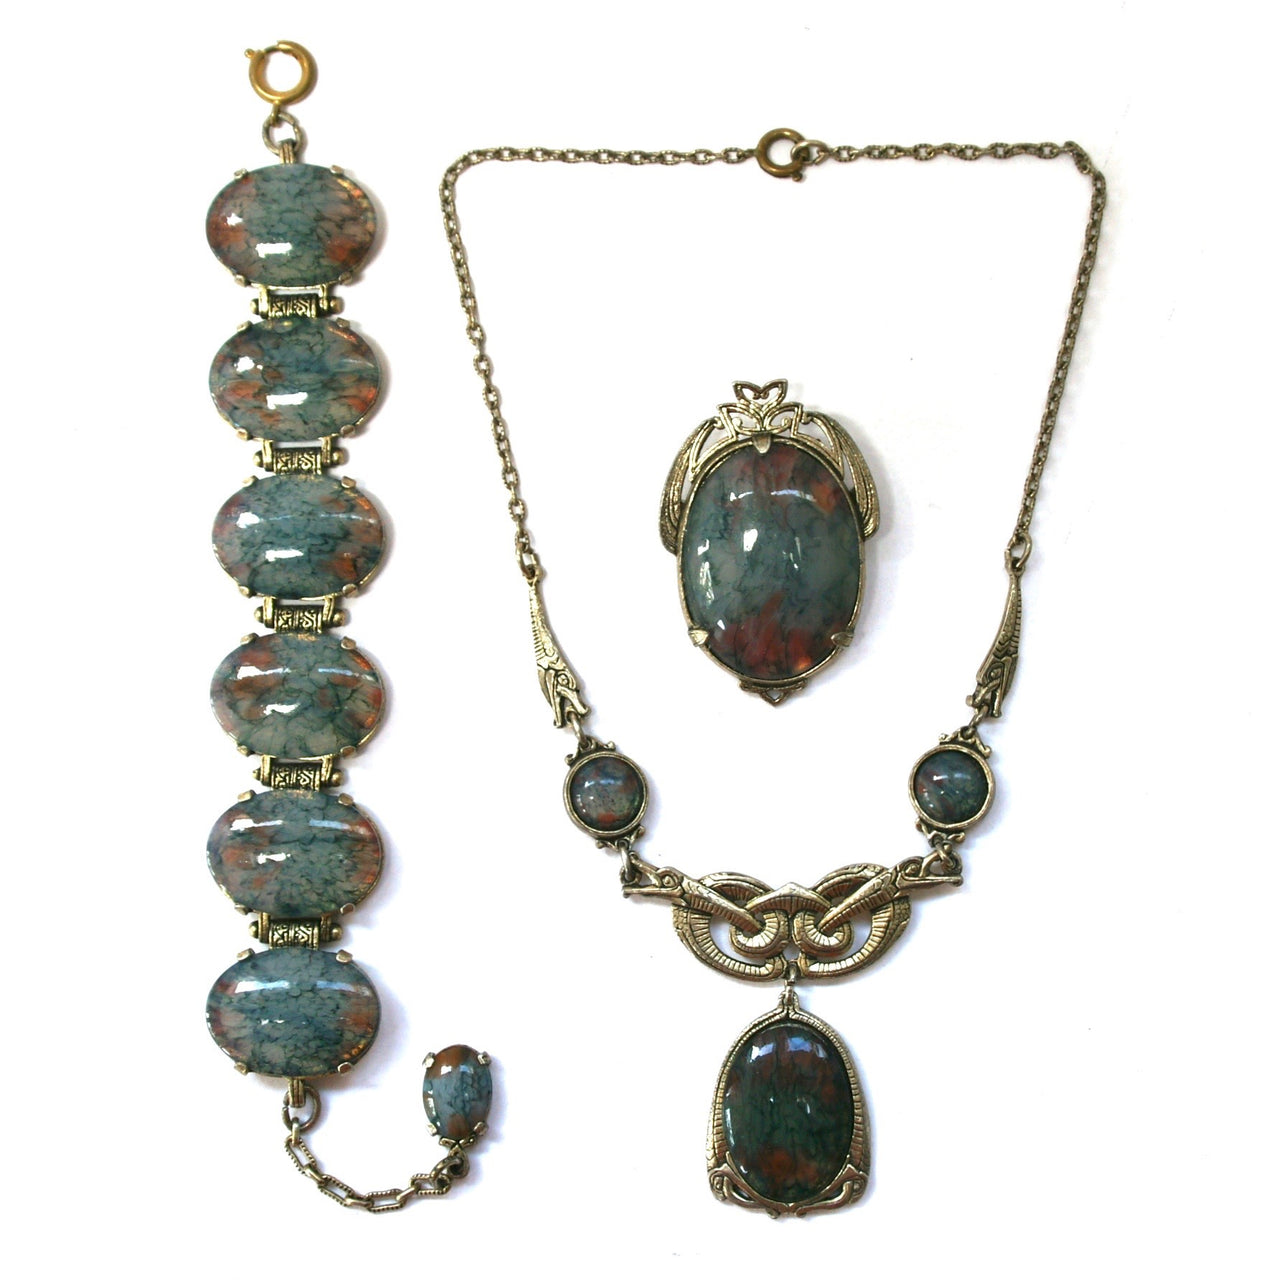 Eclectica Vintage Jewellery | UK | 1960s Miracle Necklace, Brooch and Bracelet Set, Blue